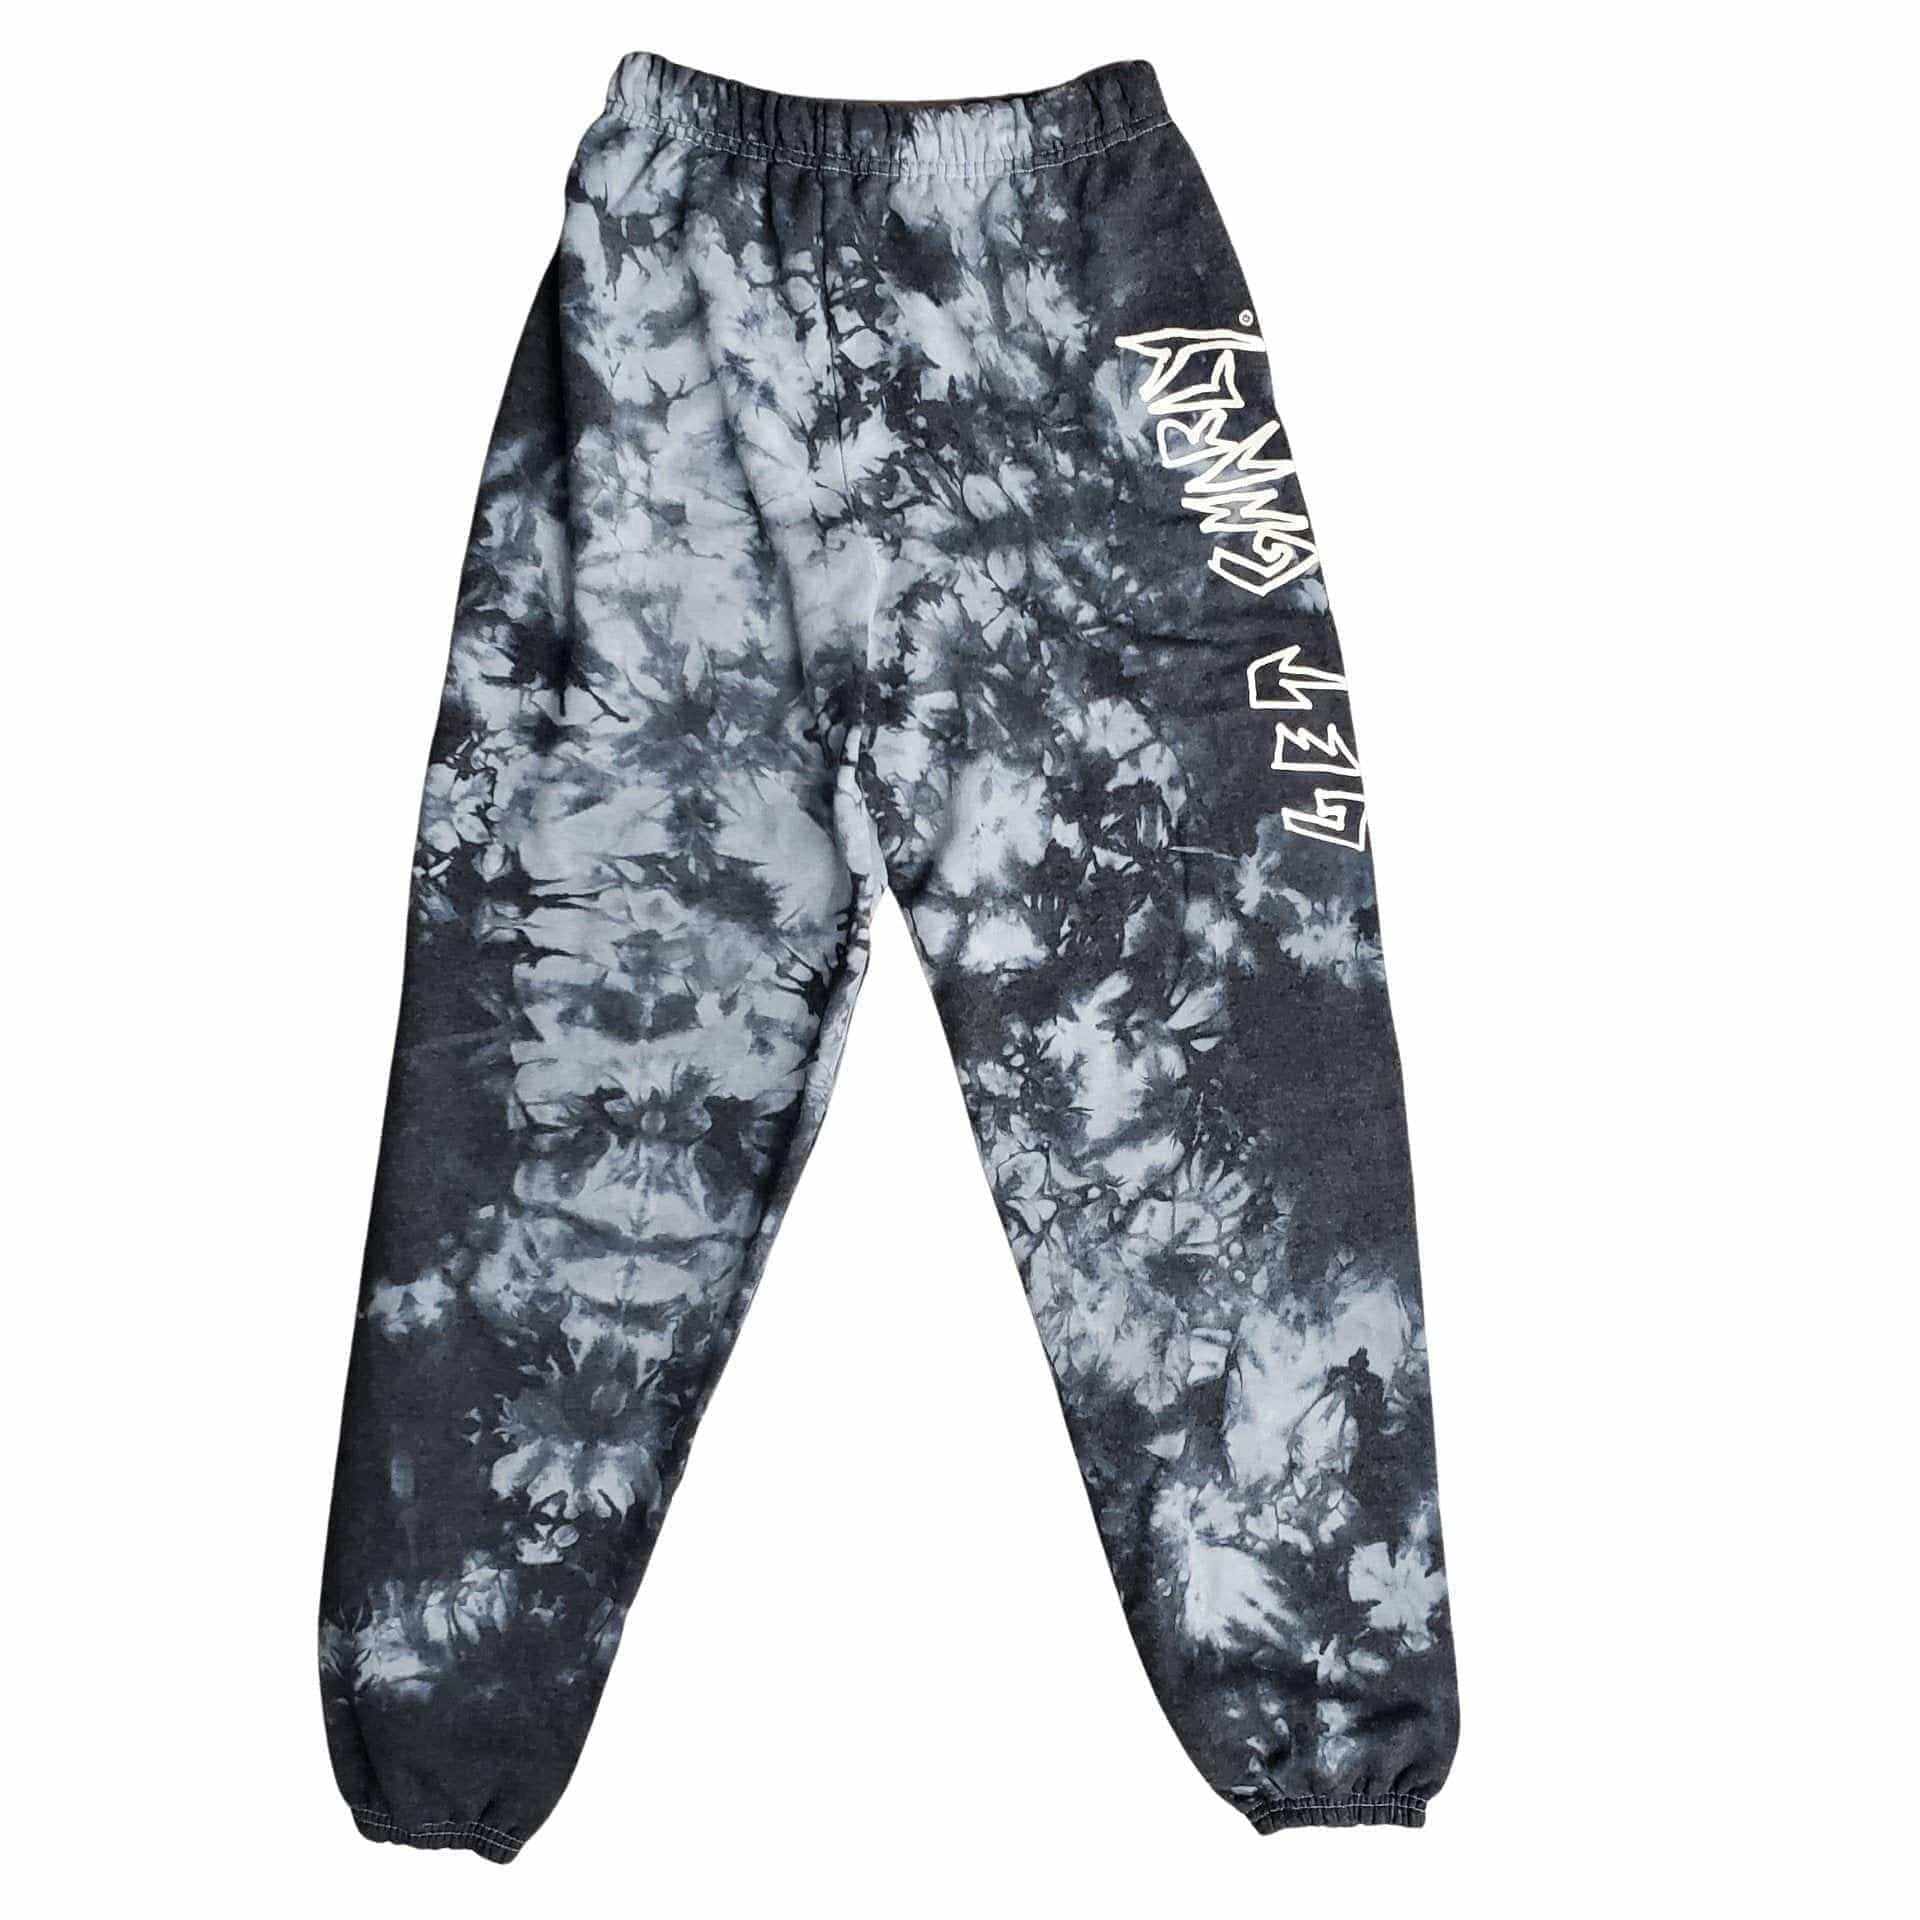 Get Gnarly Hollow Logo Sweatpants Tie Dye-Sweatpants-Get Gnarly 